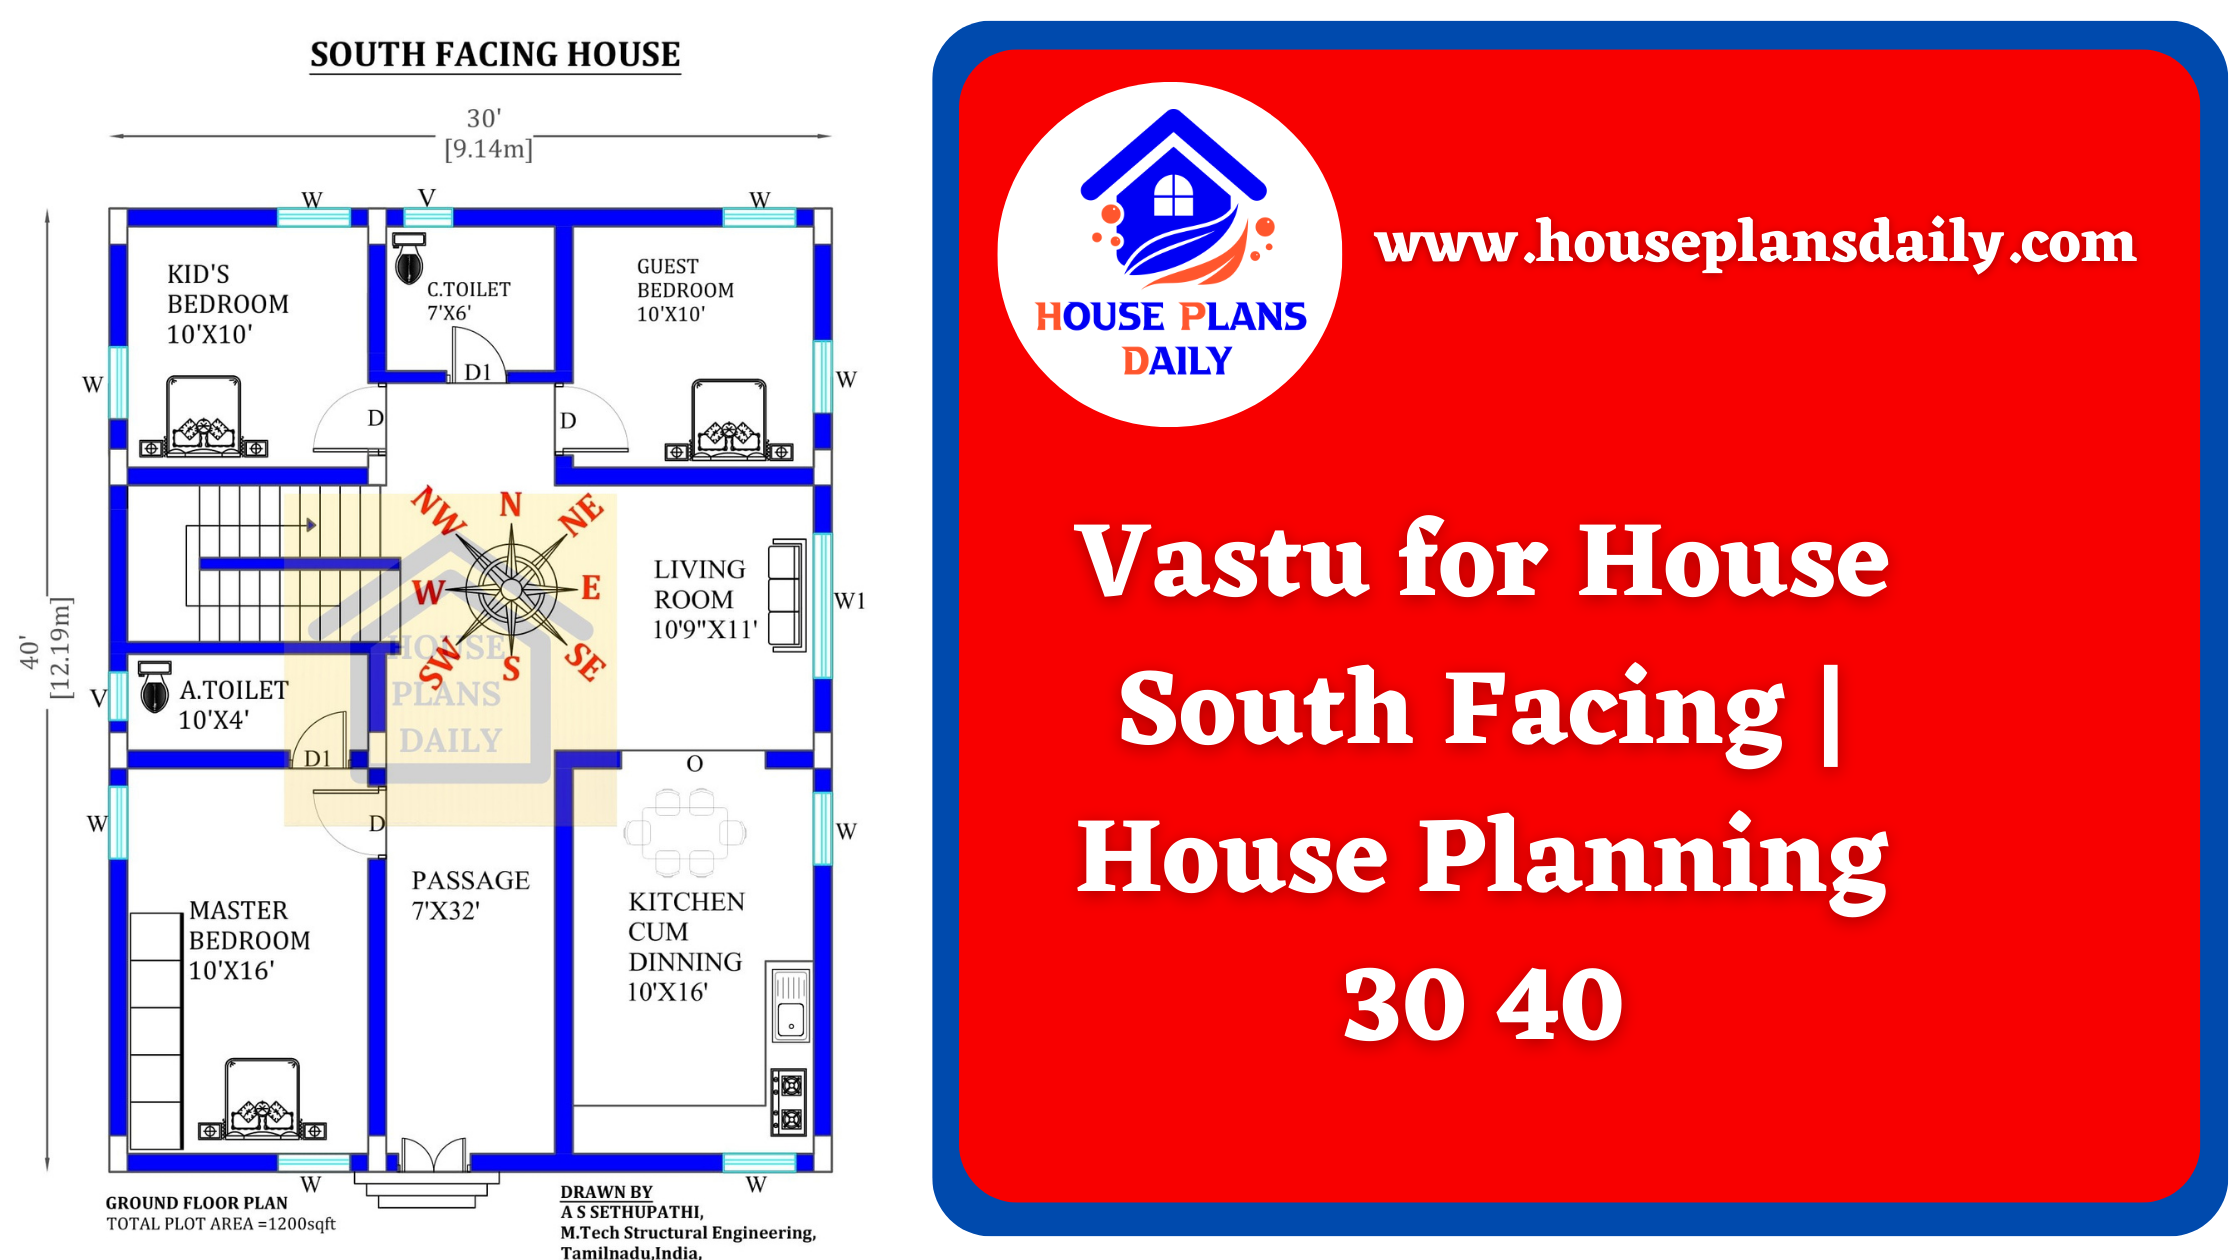 Vastu for House South Facing | House Planning 30 40